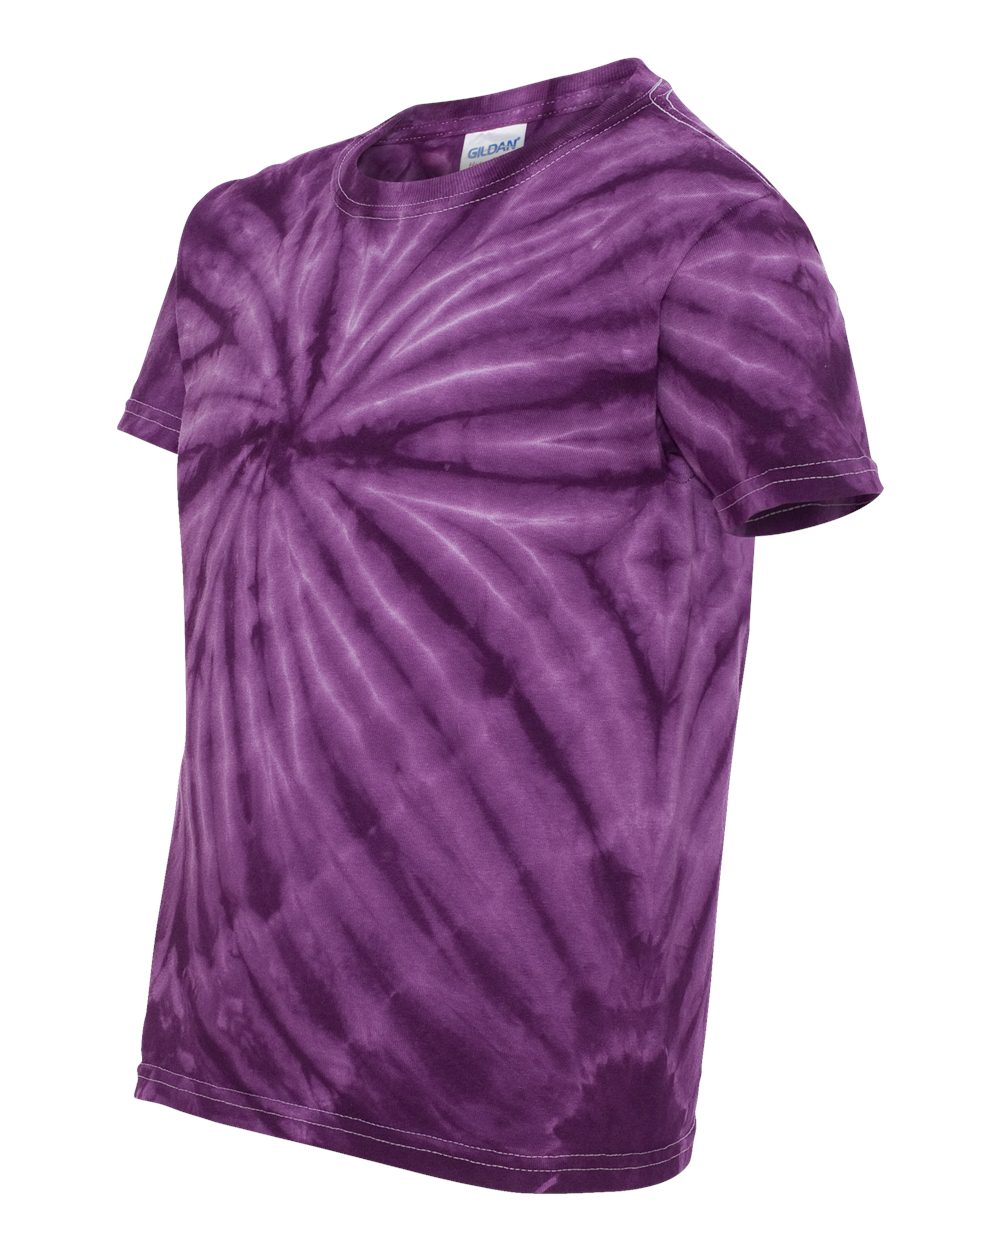 Tie-Dyed 20BCY - Youth Cyclone Vat-Dyed Pinwheel Short Sleeve T-Shirt